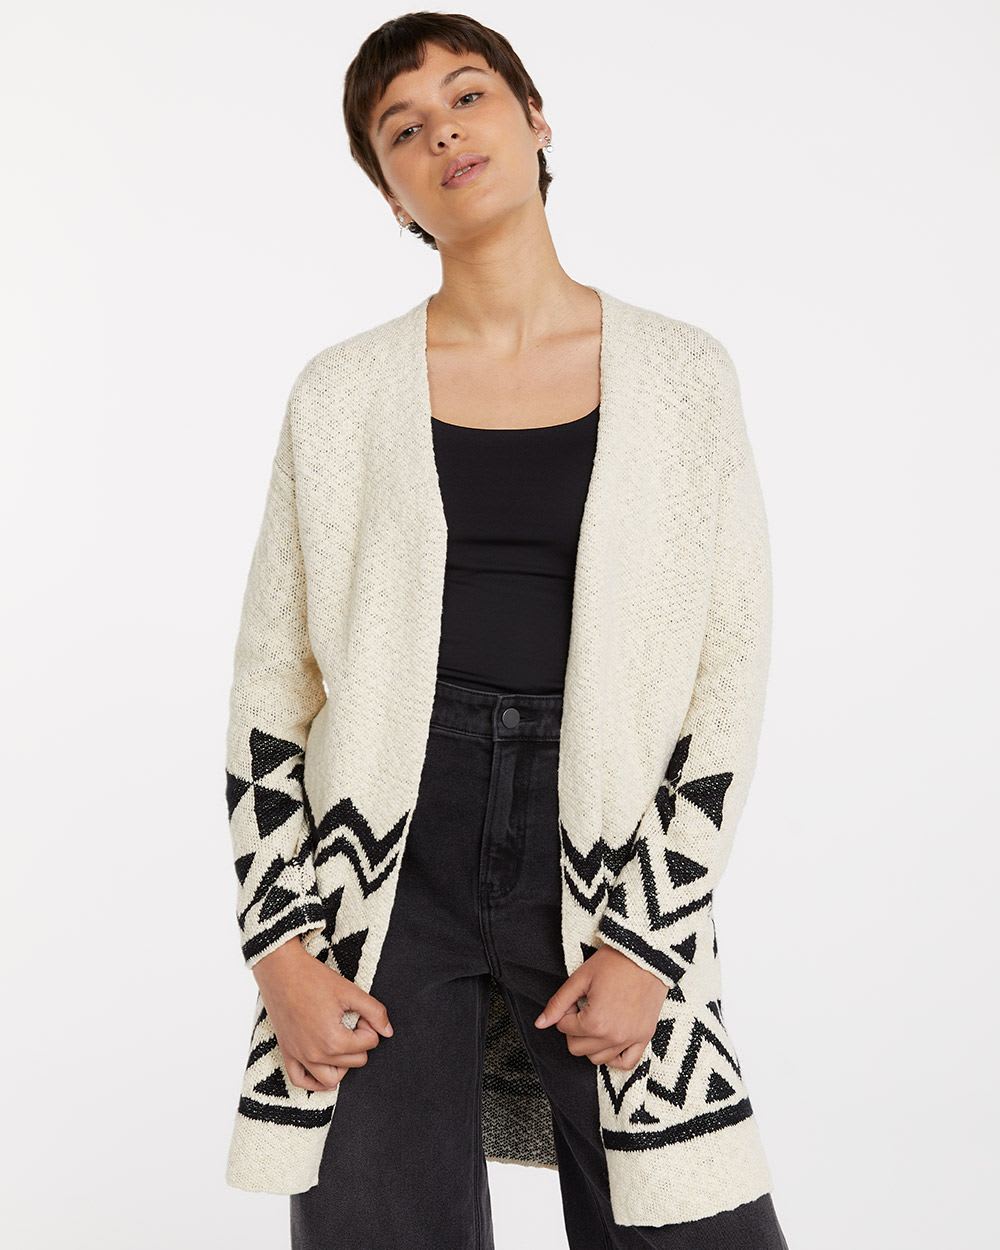 Long-Sleeve Open Cardigan with Jacquard Pattern